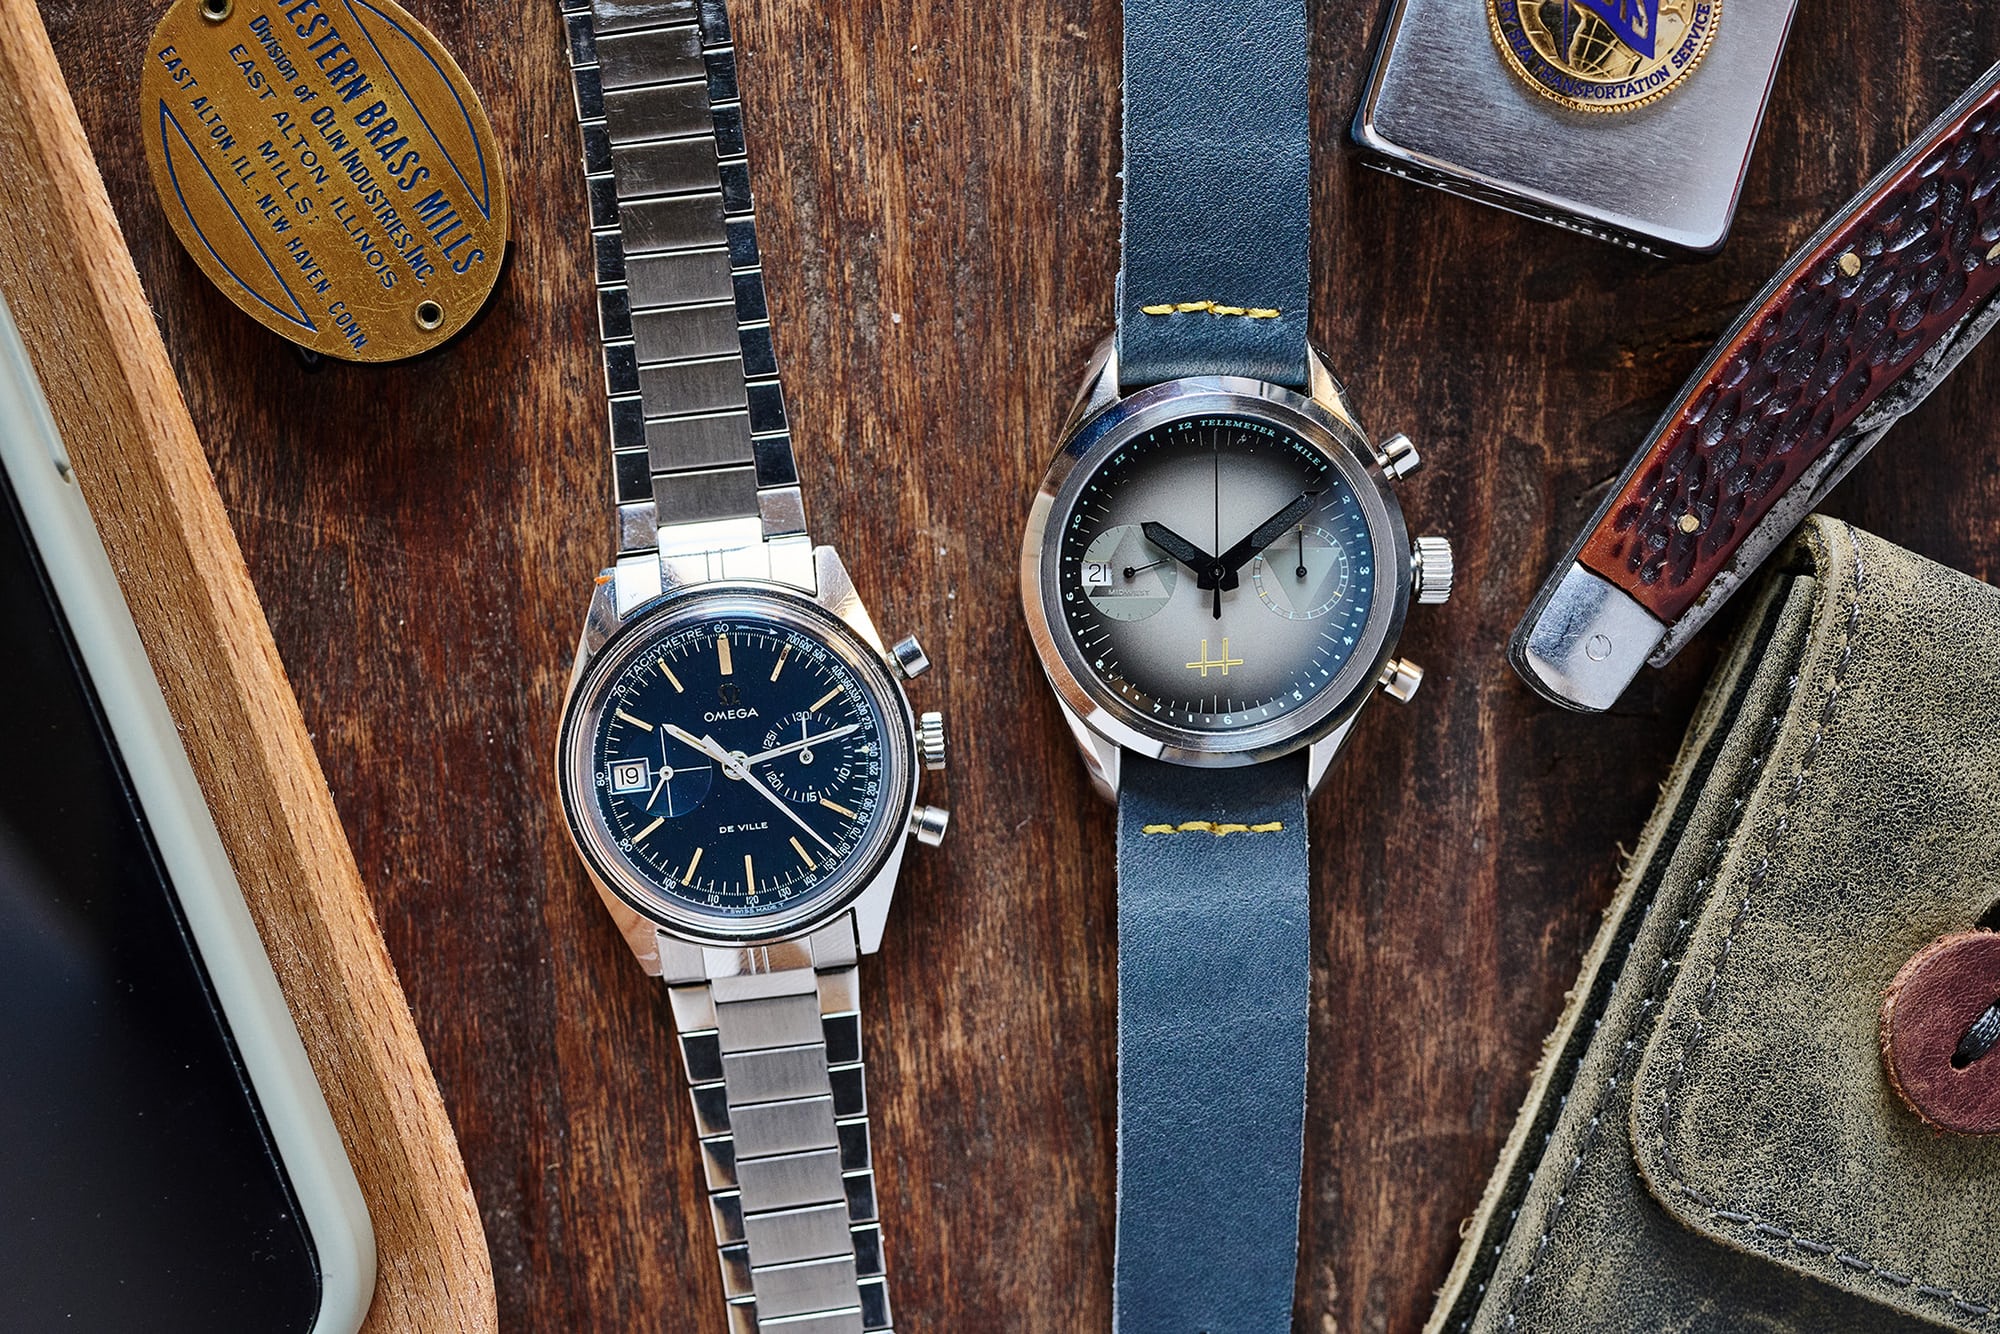 An Omega watch and a Haven watch 